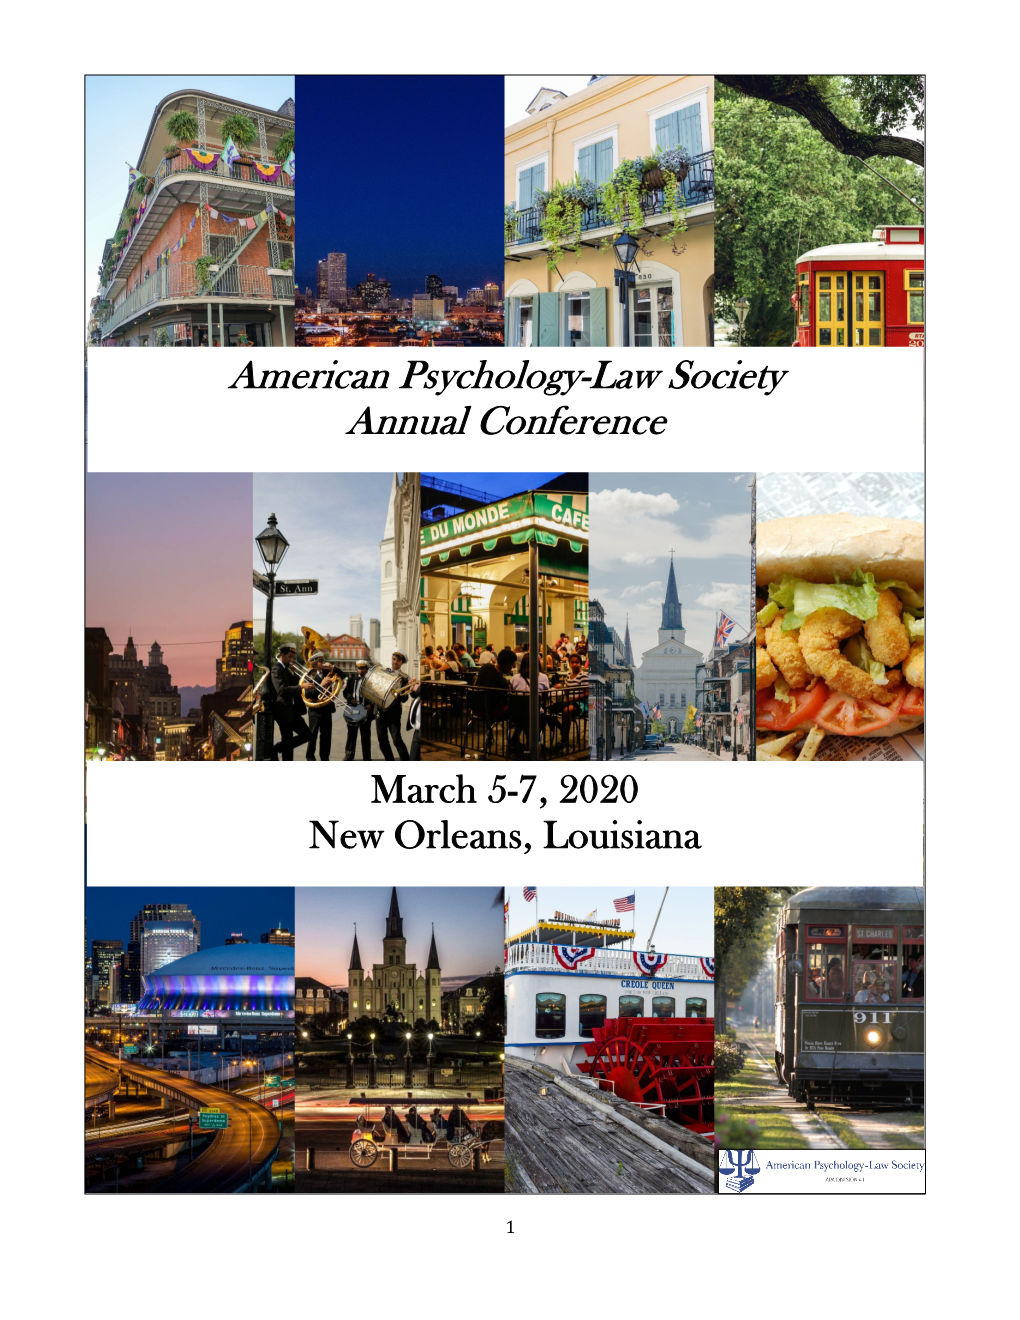 American Psychology-Law Society Annual Conference